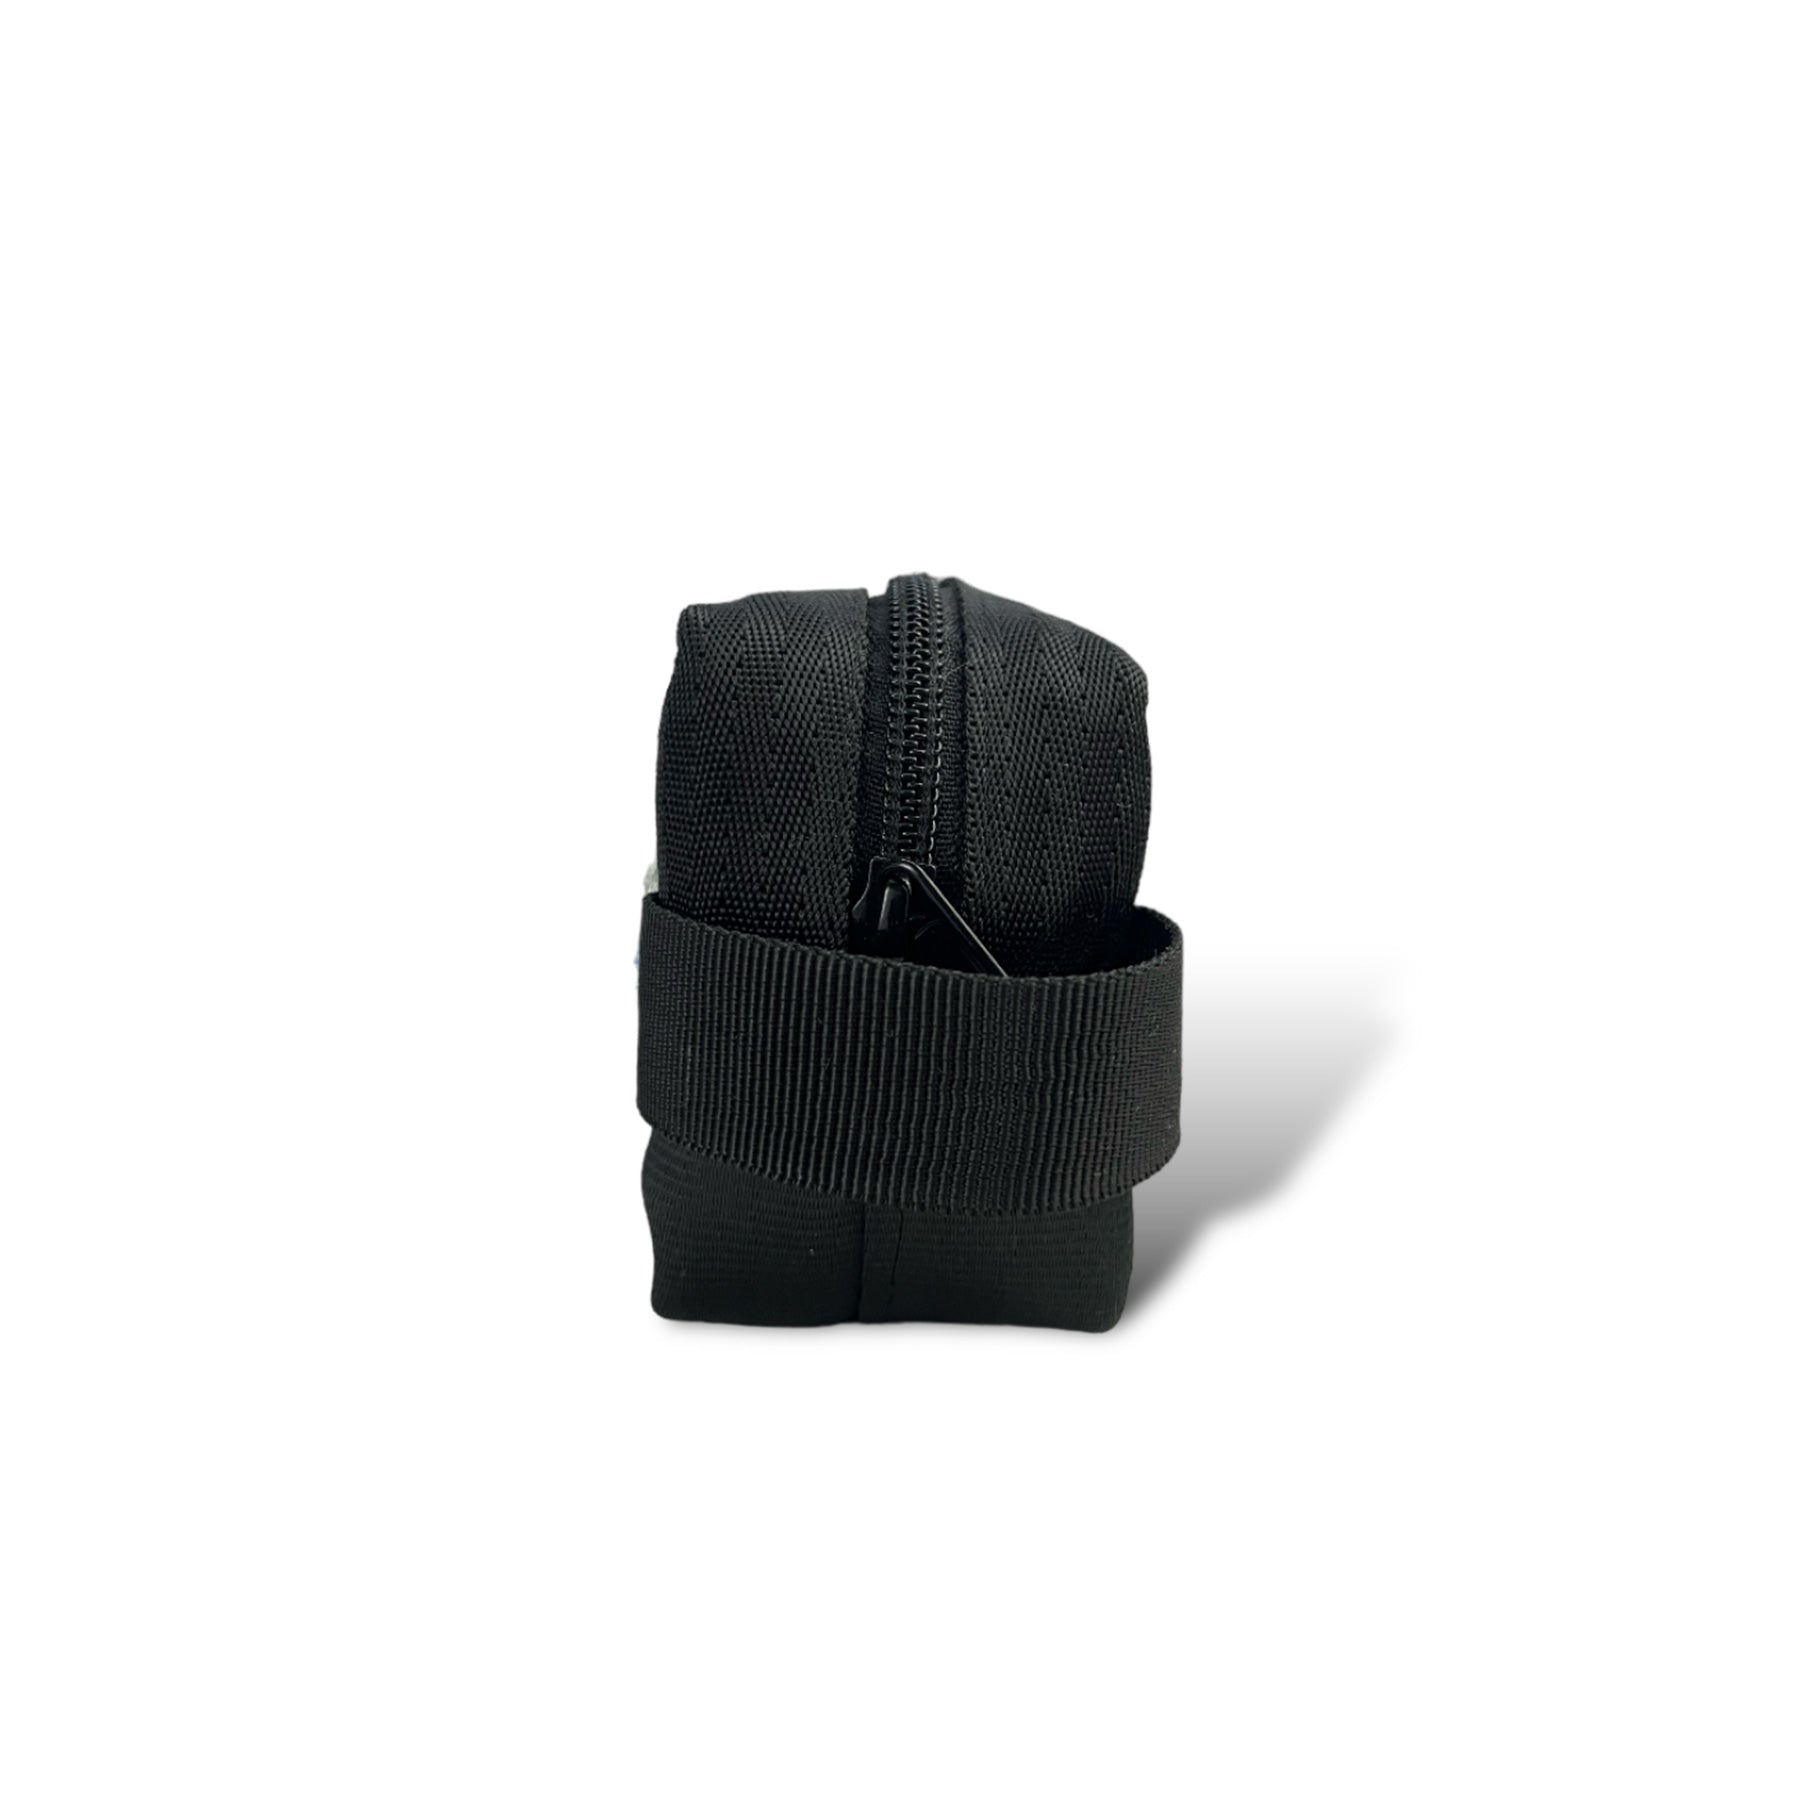 The Good Dopp Kit in Grey Felt and Rescued Black Seat Belts